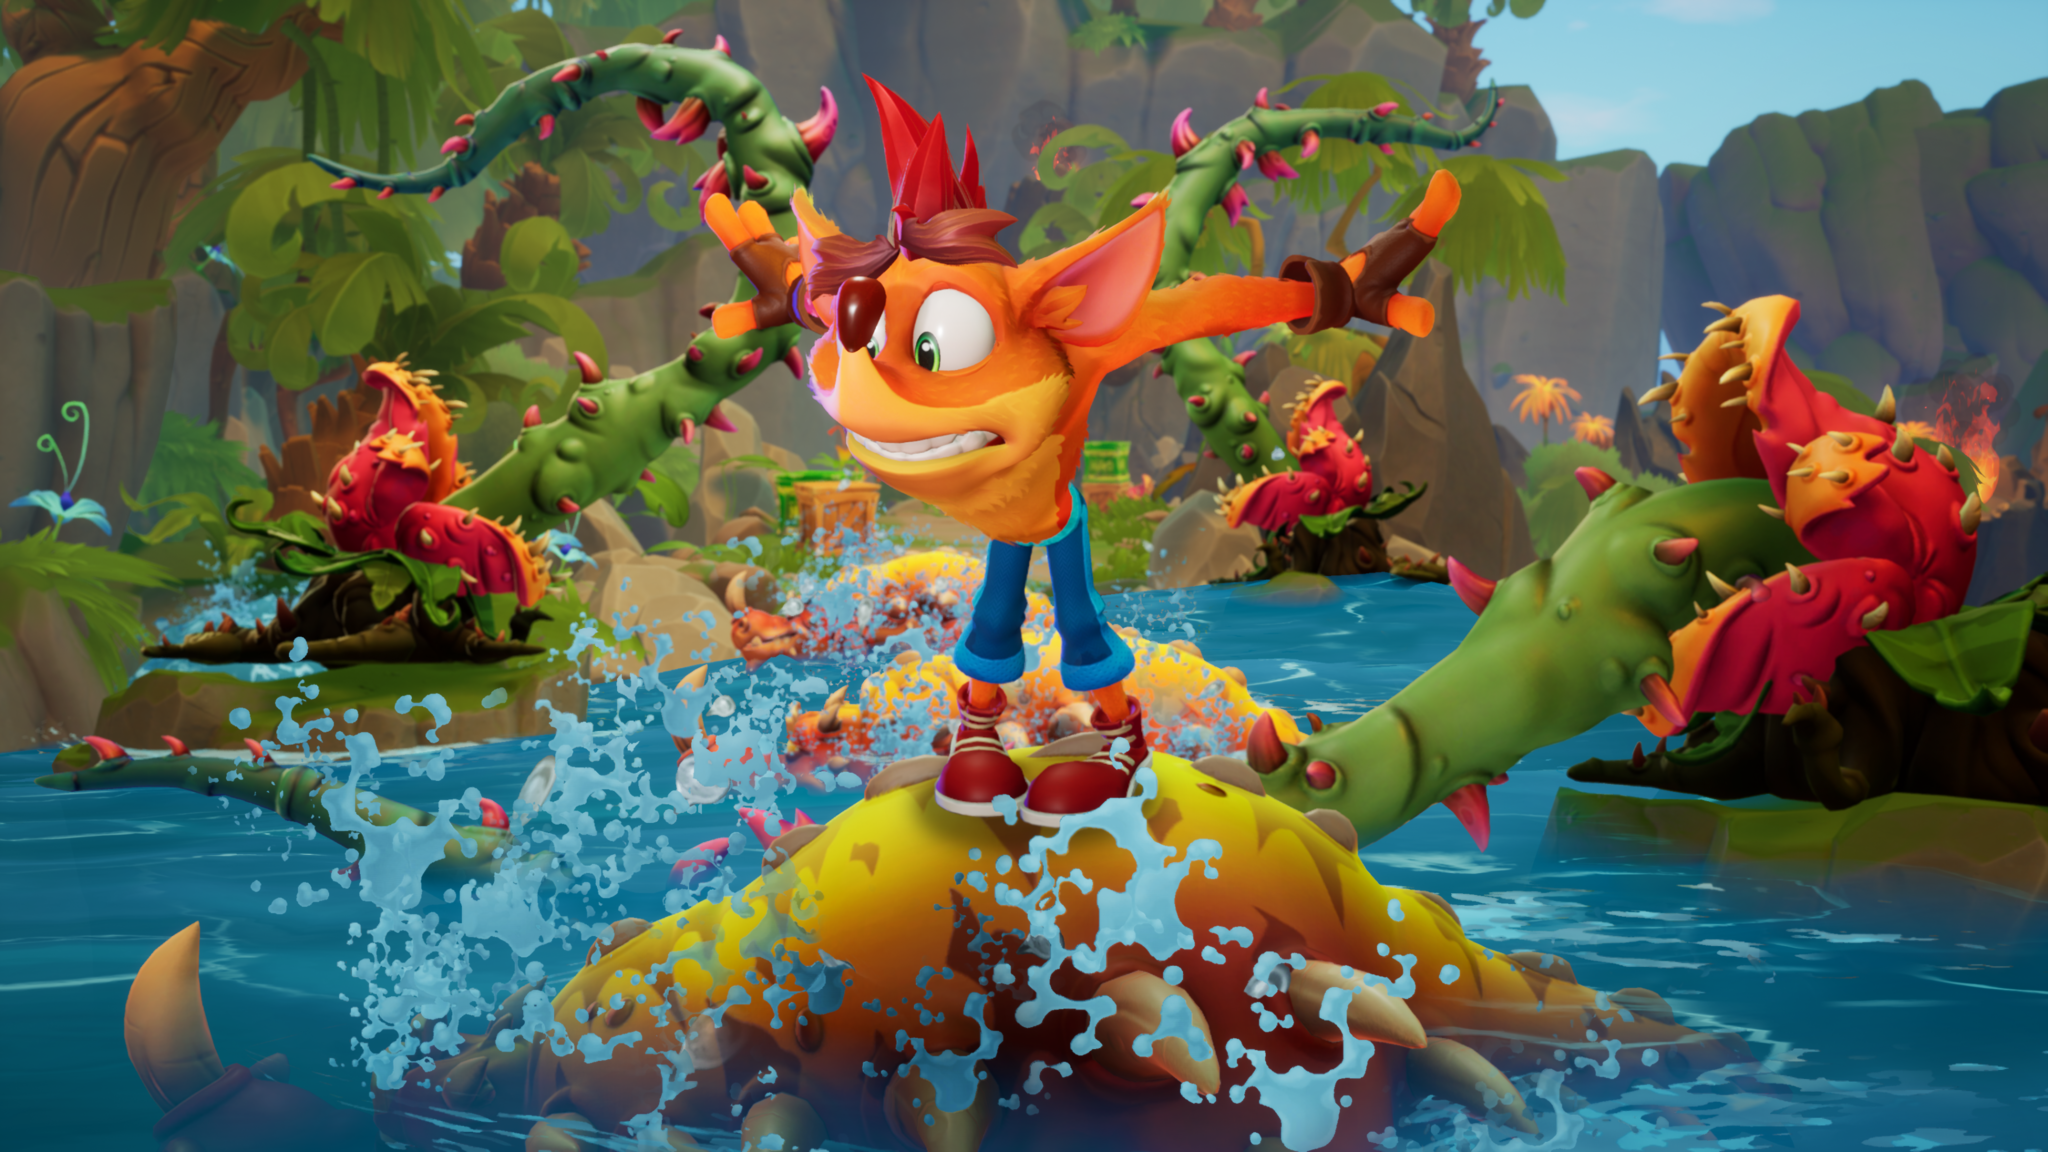 Crash Bandicoot 4 Reportedly Has Over 100 Levels